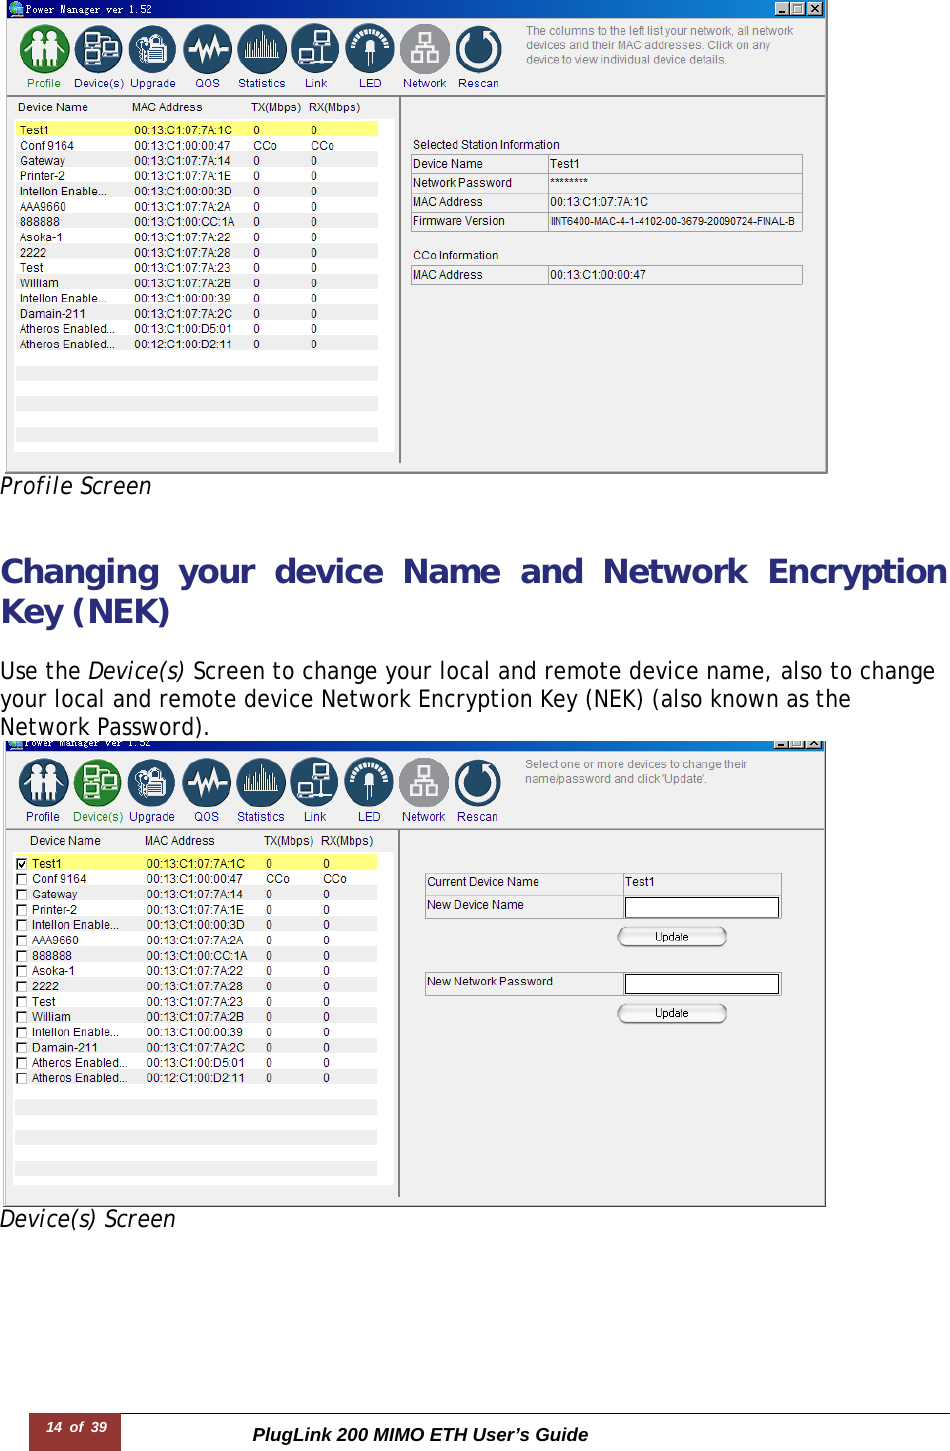 PlugLink 200 MIMO ETH User’s Guide14 of 39         Profile Screen  Changing your device Name and Network Encryption Key (NEK)  Use the Device(s) Screen to change your local and remote device name, also to change your local and remote device Network Encryption Key (NEK) (also known as the Network Password).  Device(s) Screen 